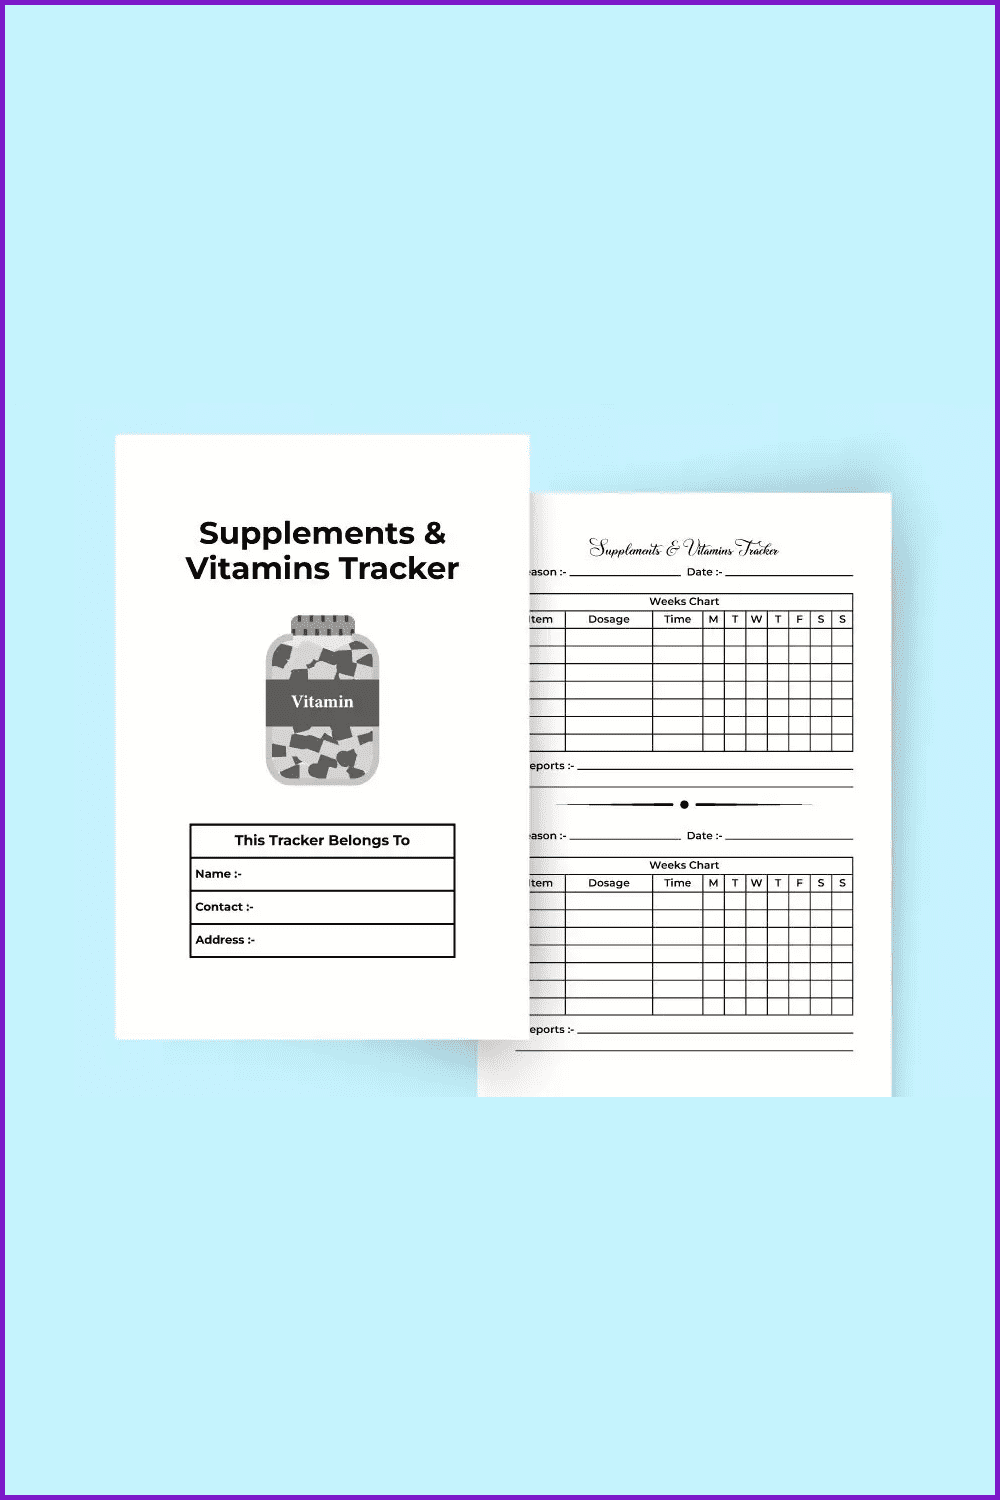 Supplement and vitamins tracker.